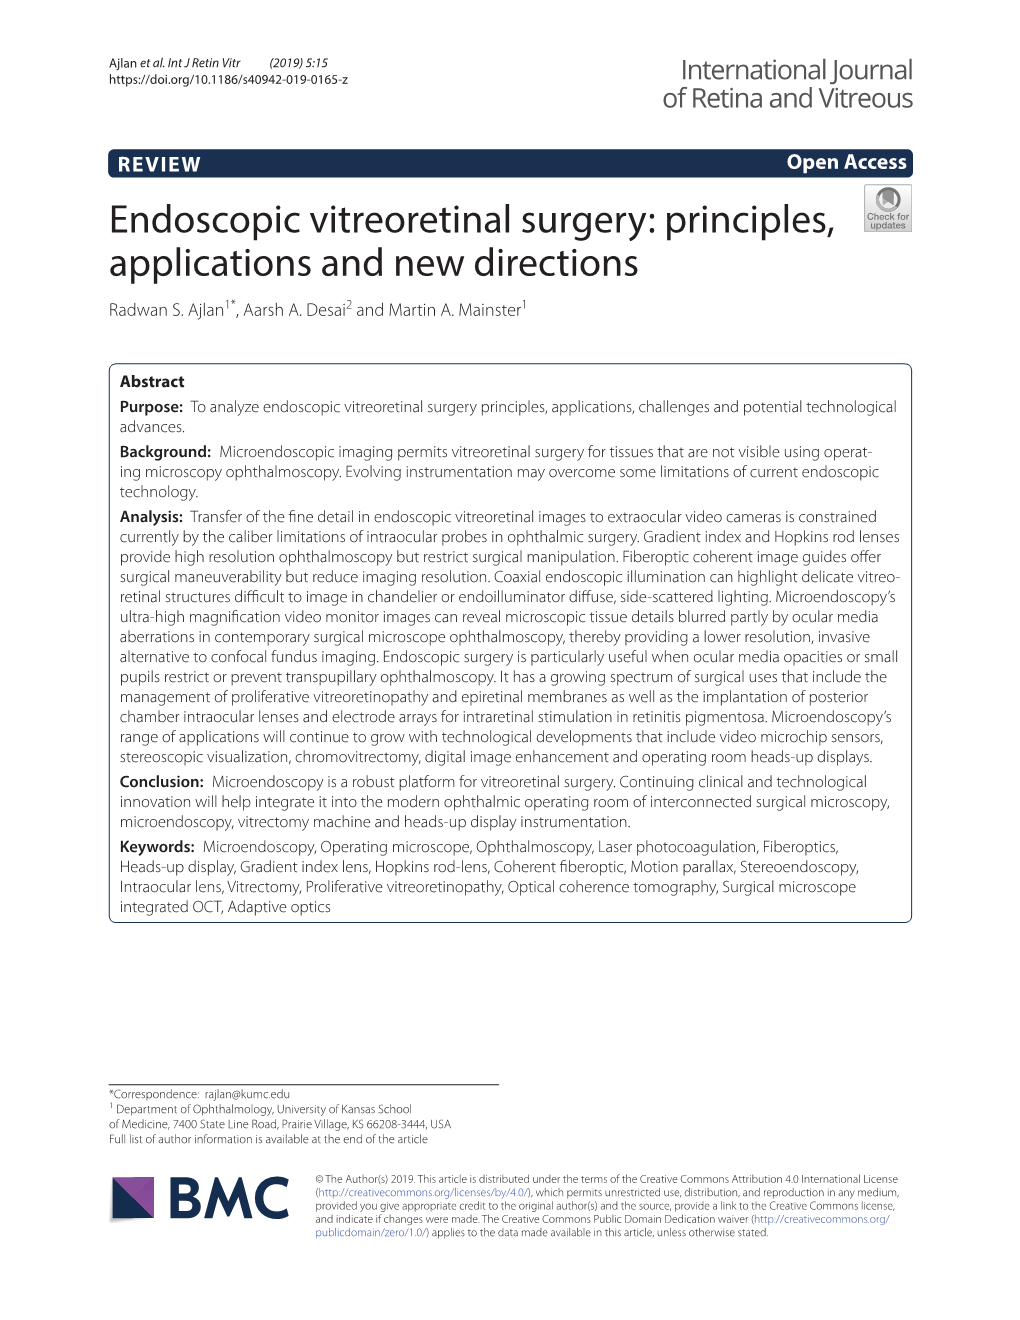 Endoscopic Vitreoretinal Surgery: Principles, Applications and New Directions Radwan S